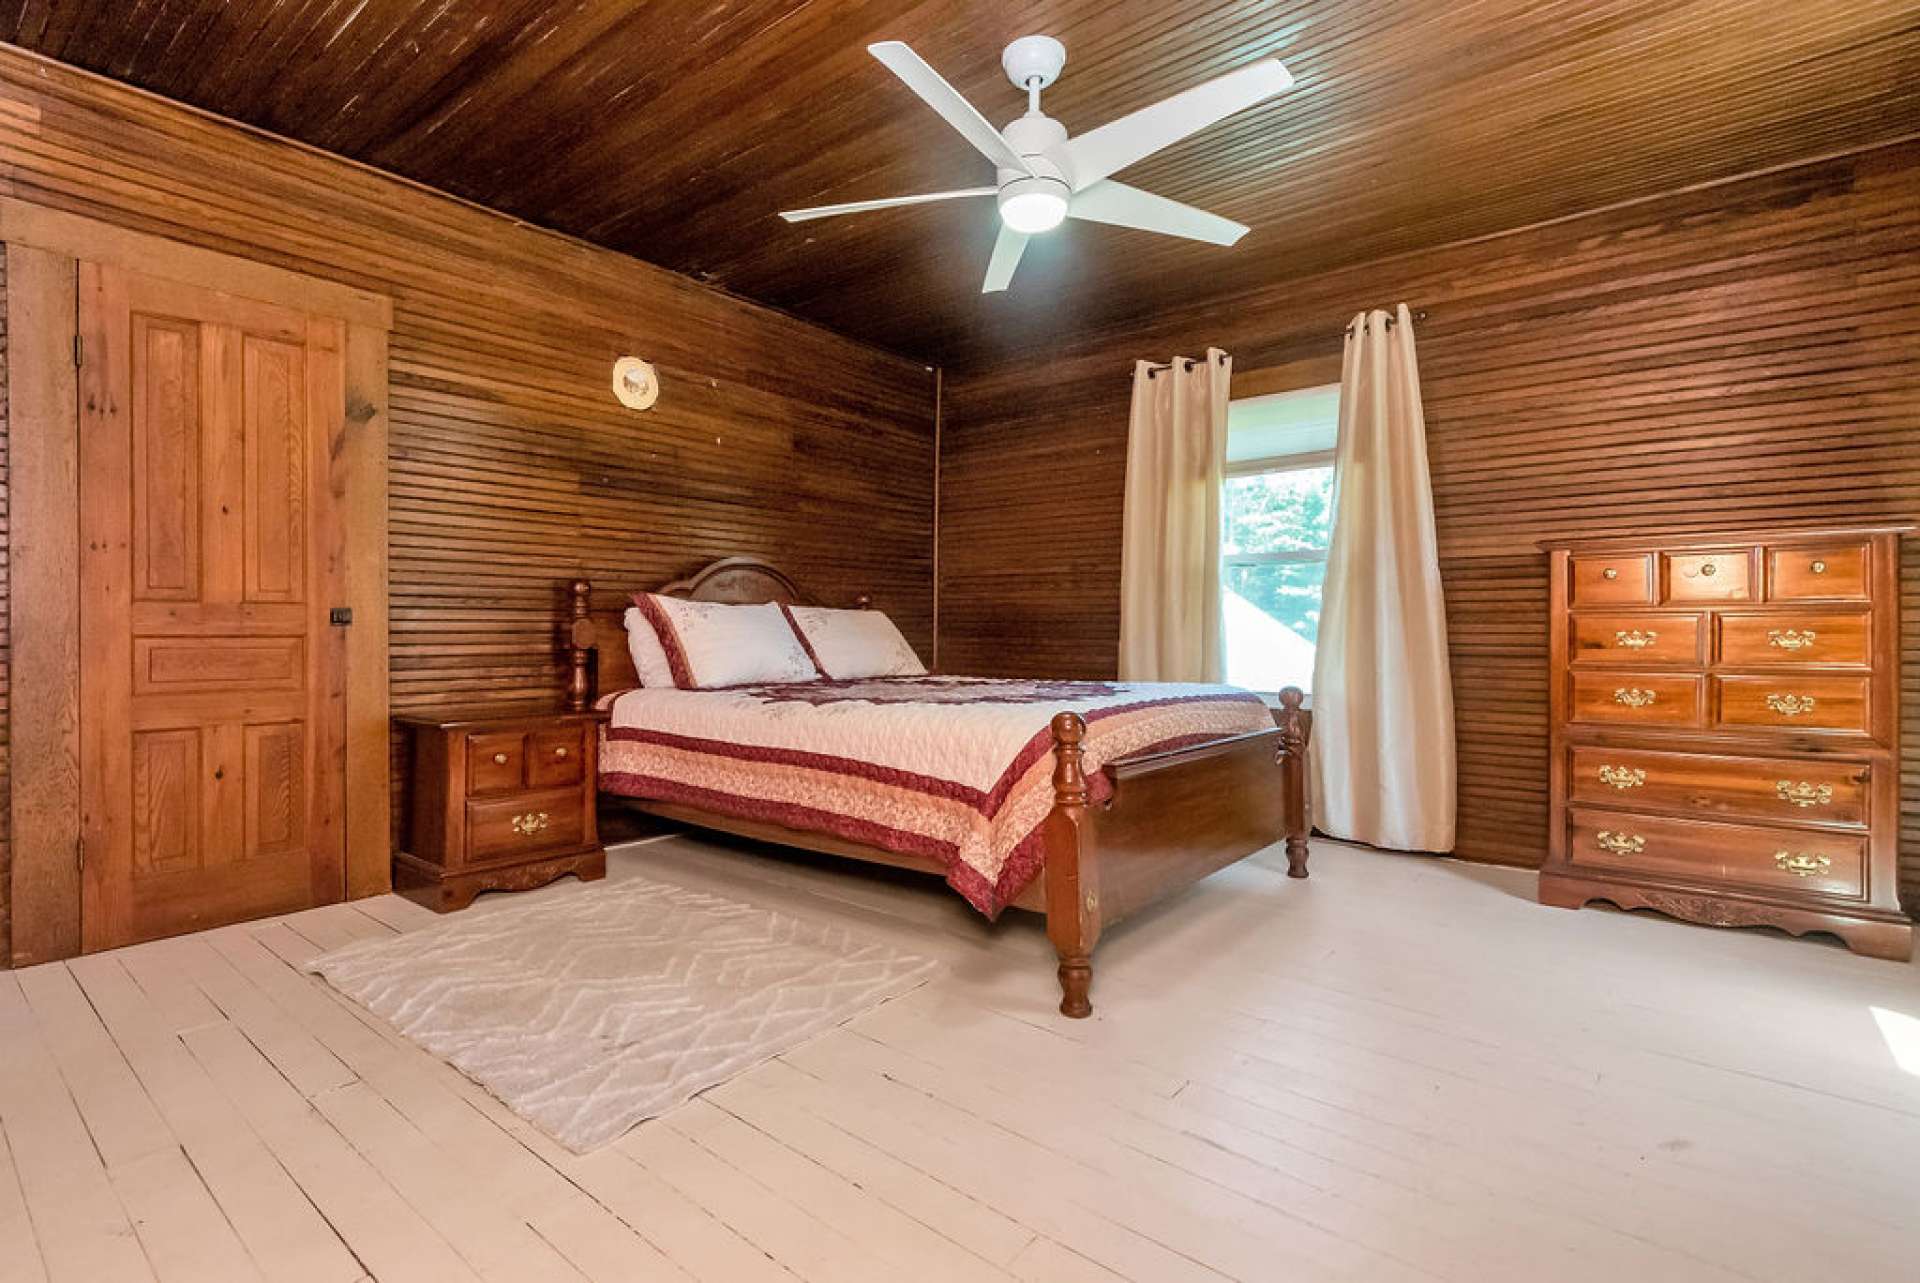 The fourth bedroom has painted floors for a different style. The color compliments the dark wood.